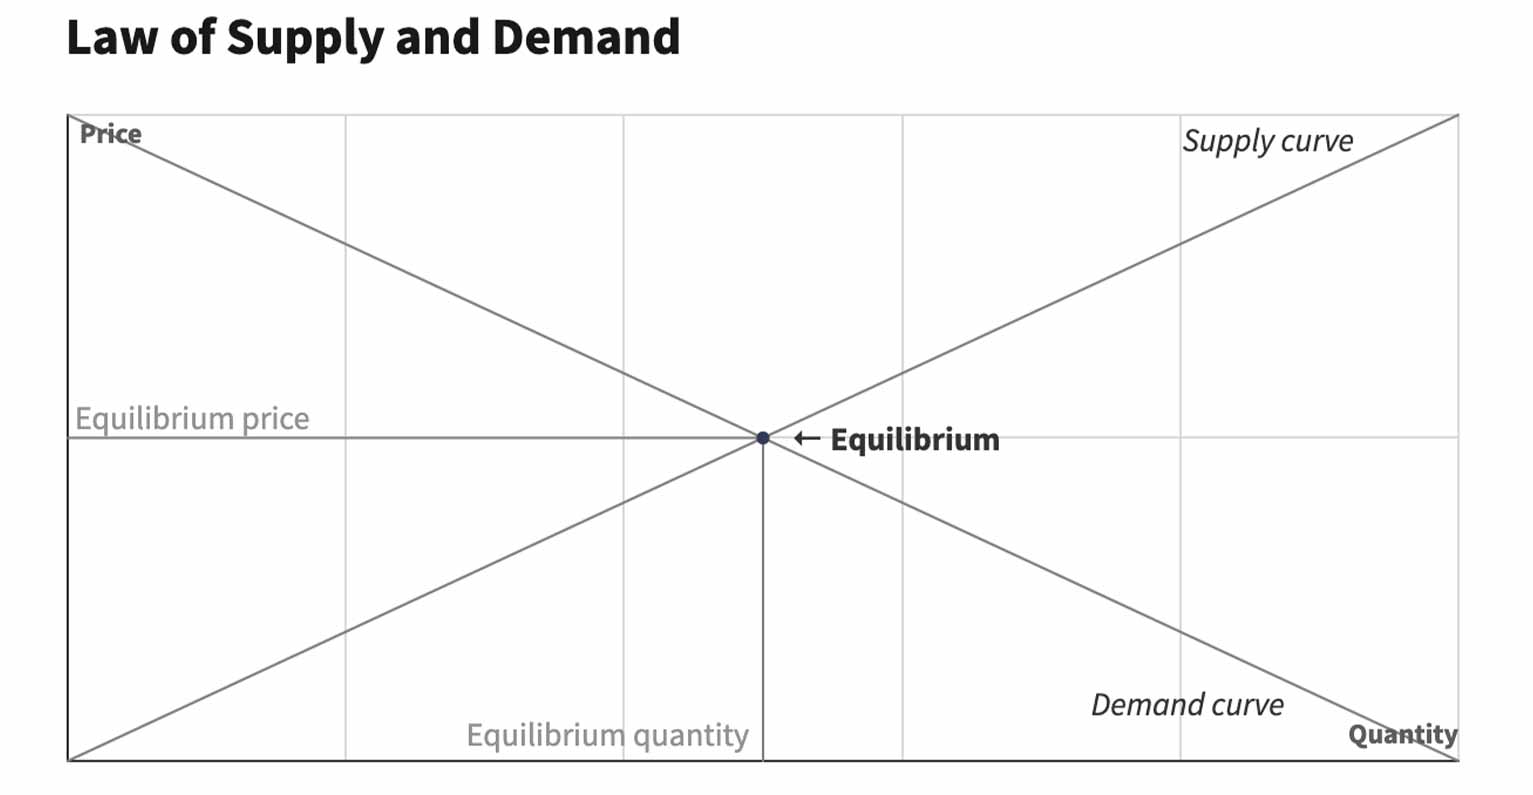 This relationship between supply and demand can be illustrated in the form of a supply and demand curve.